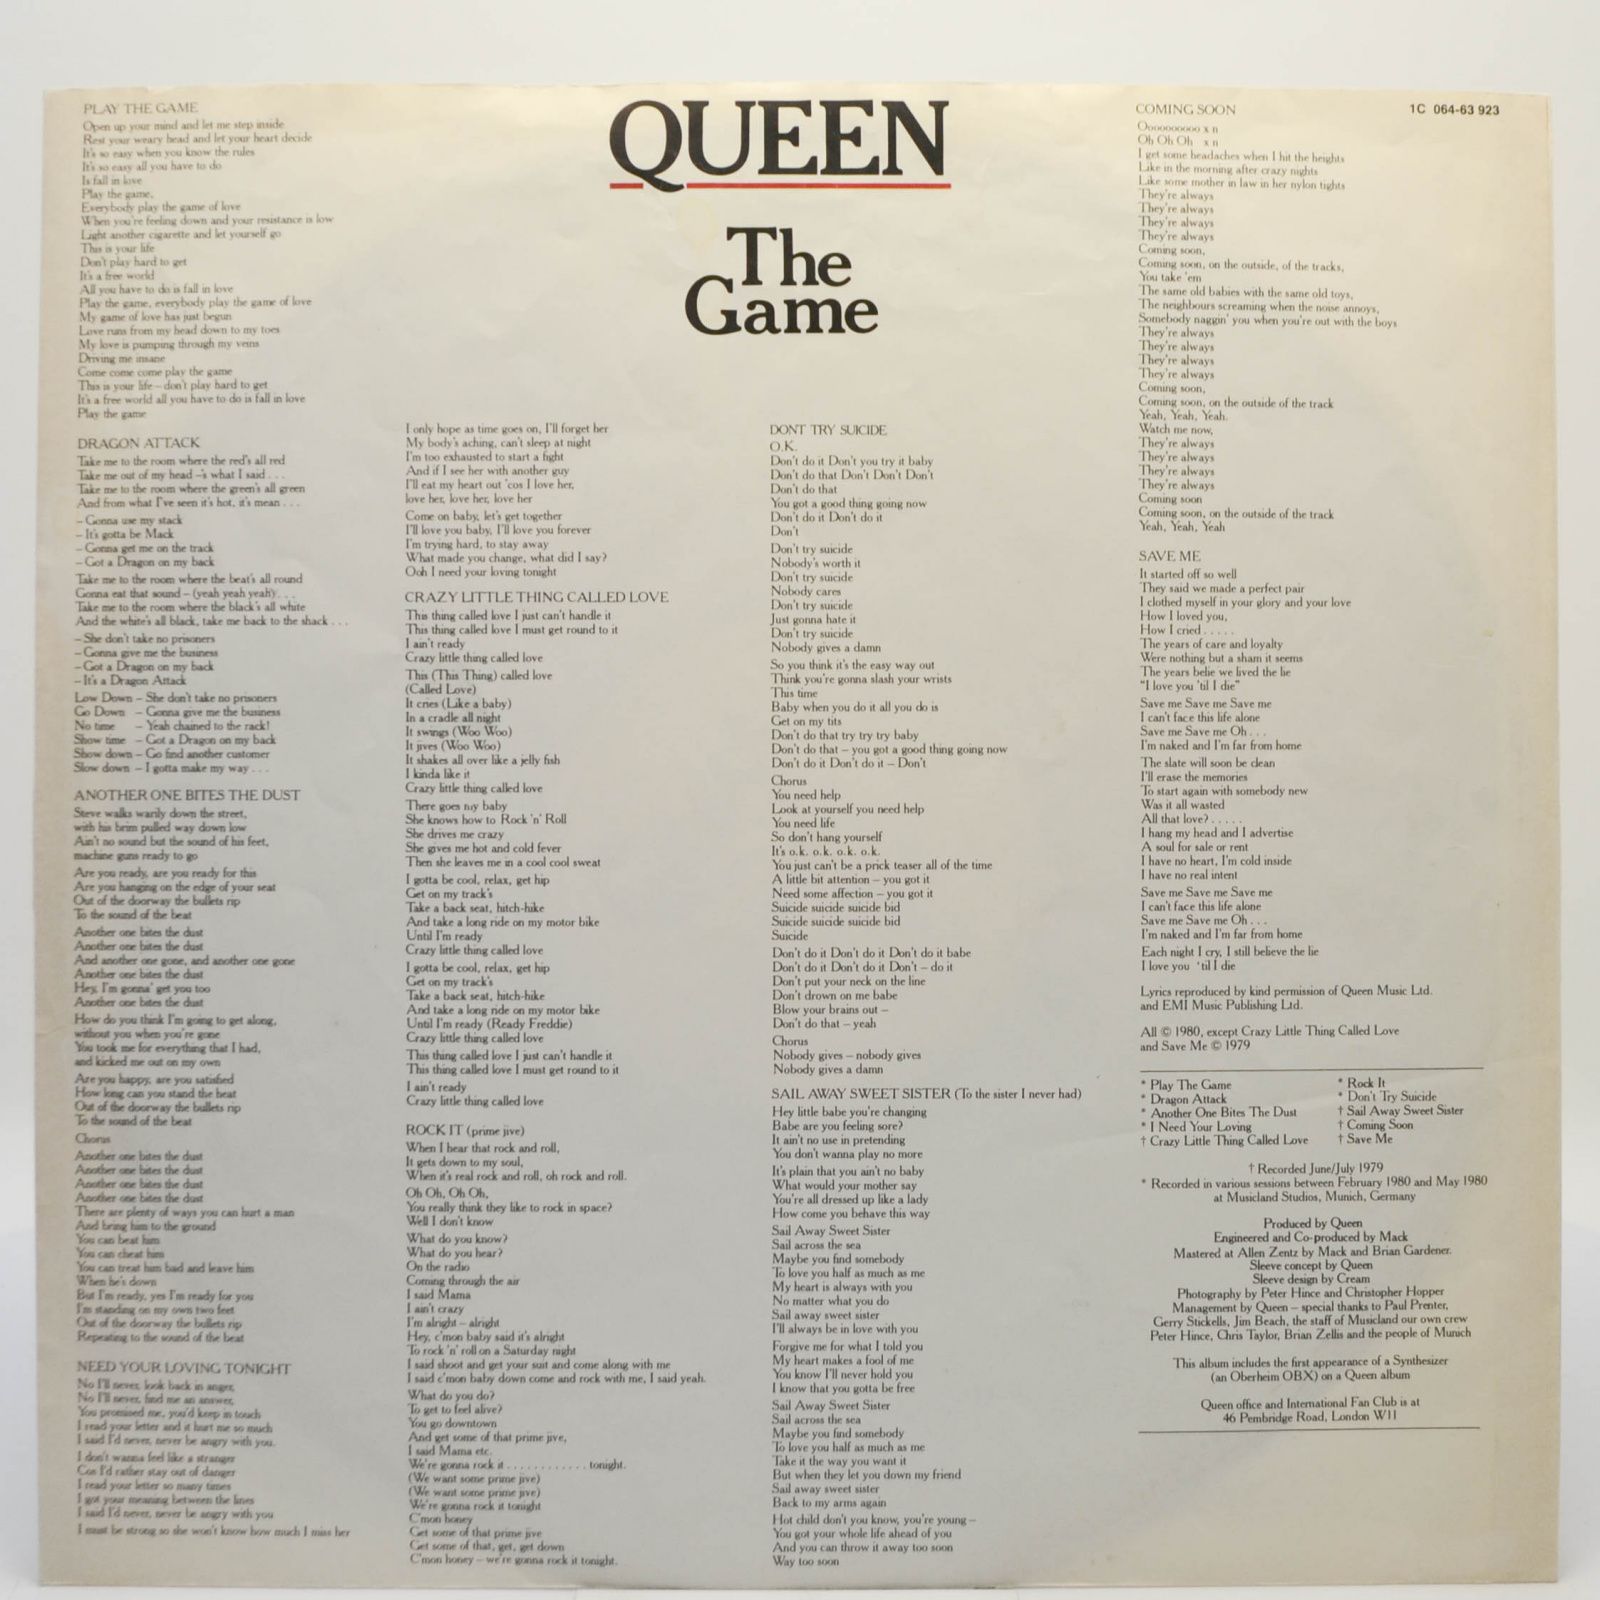 Queen — The Game, 1980